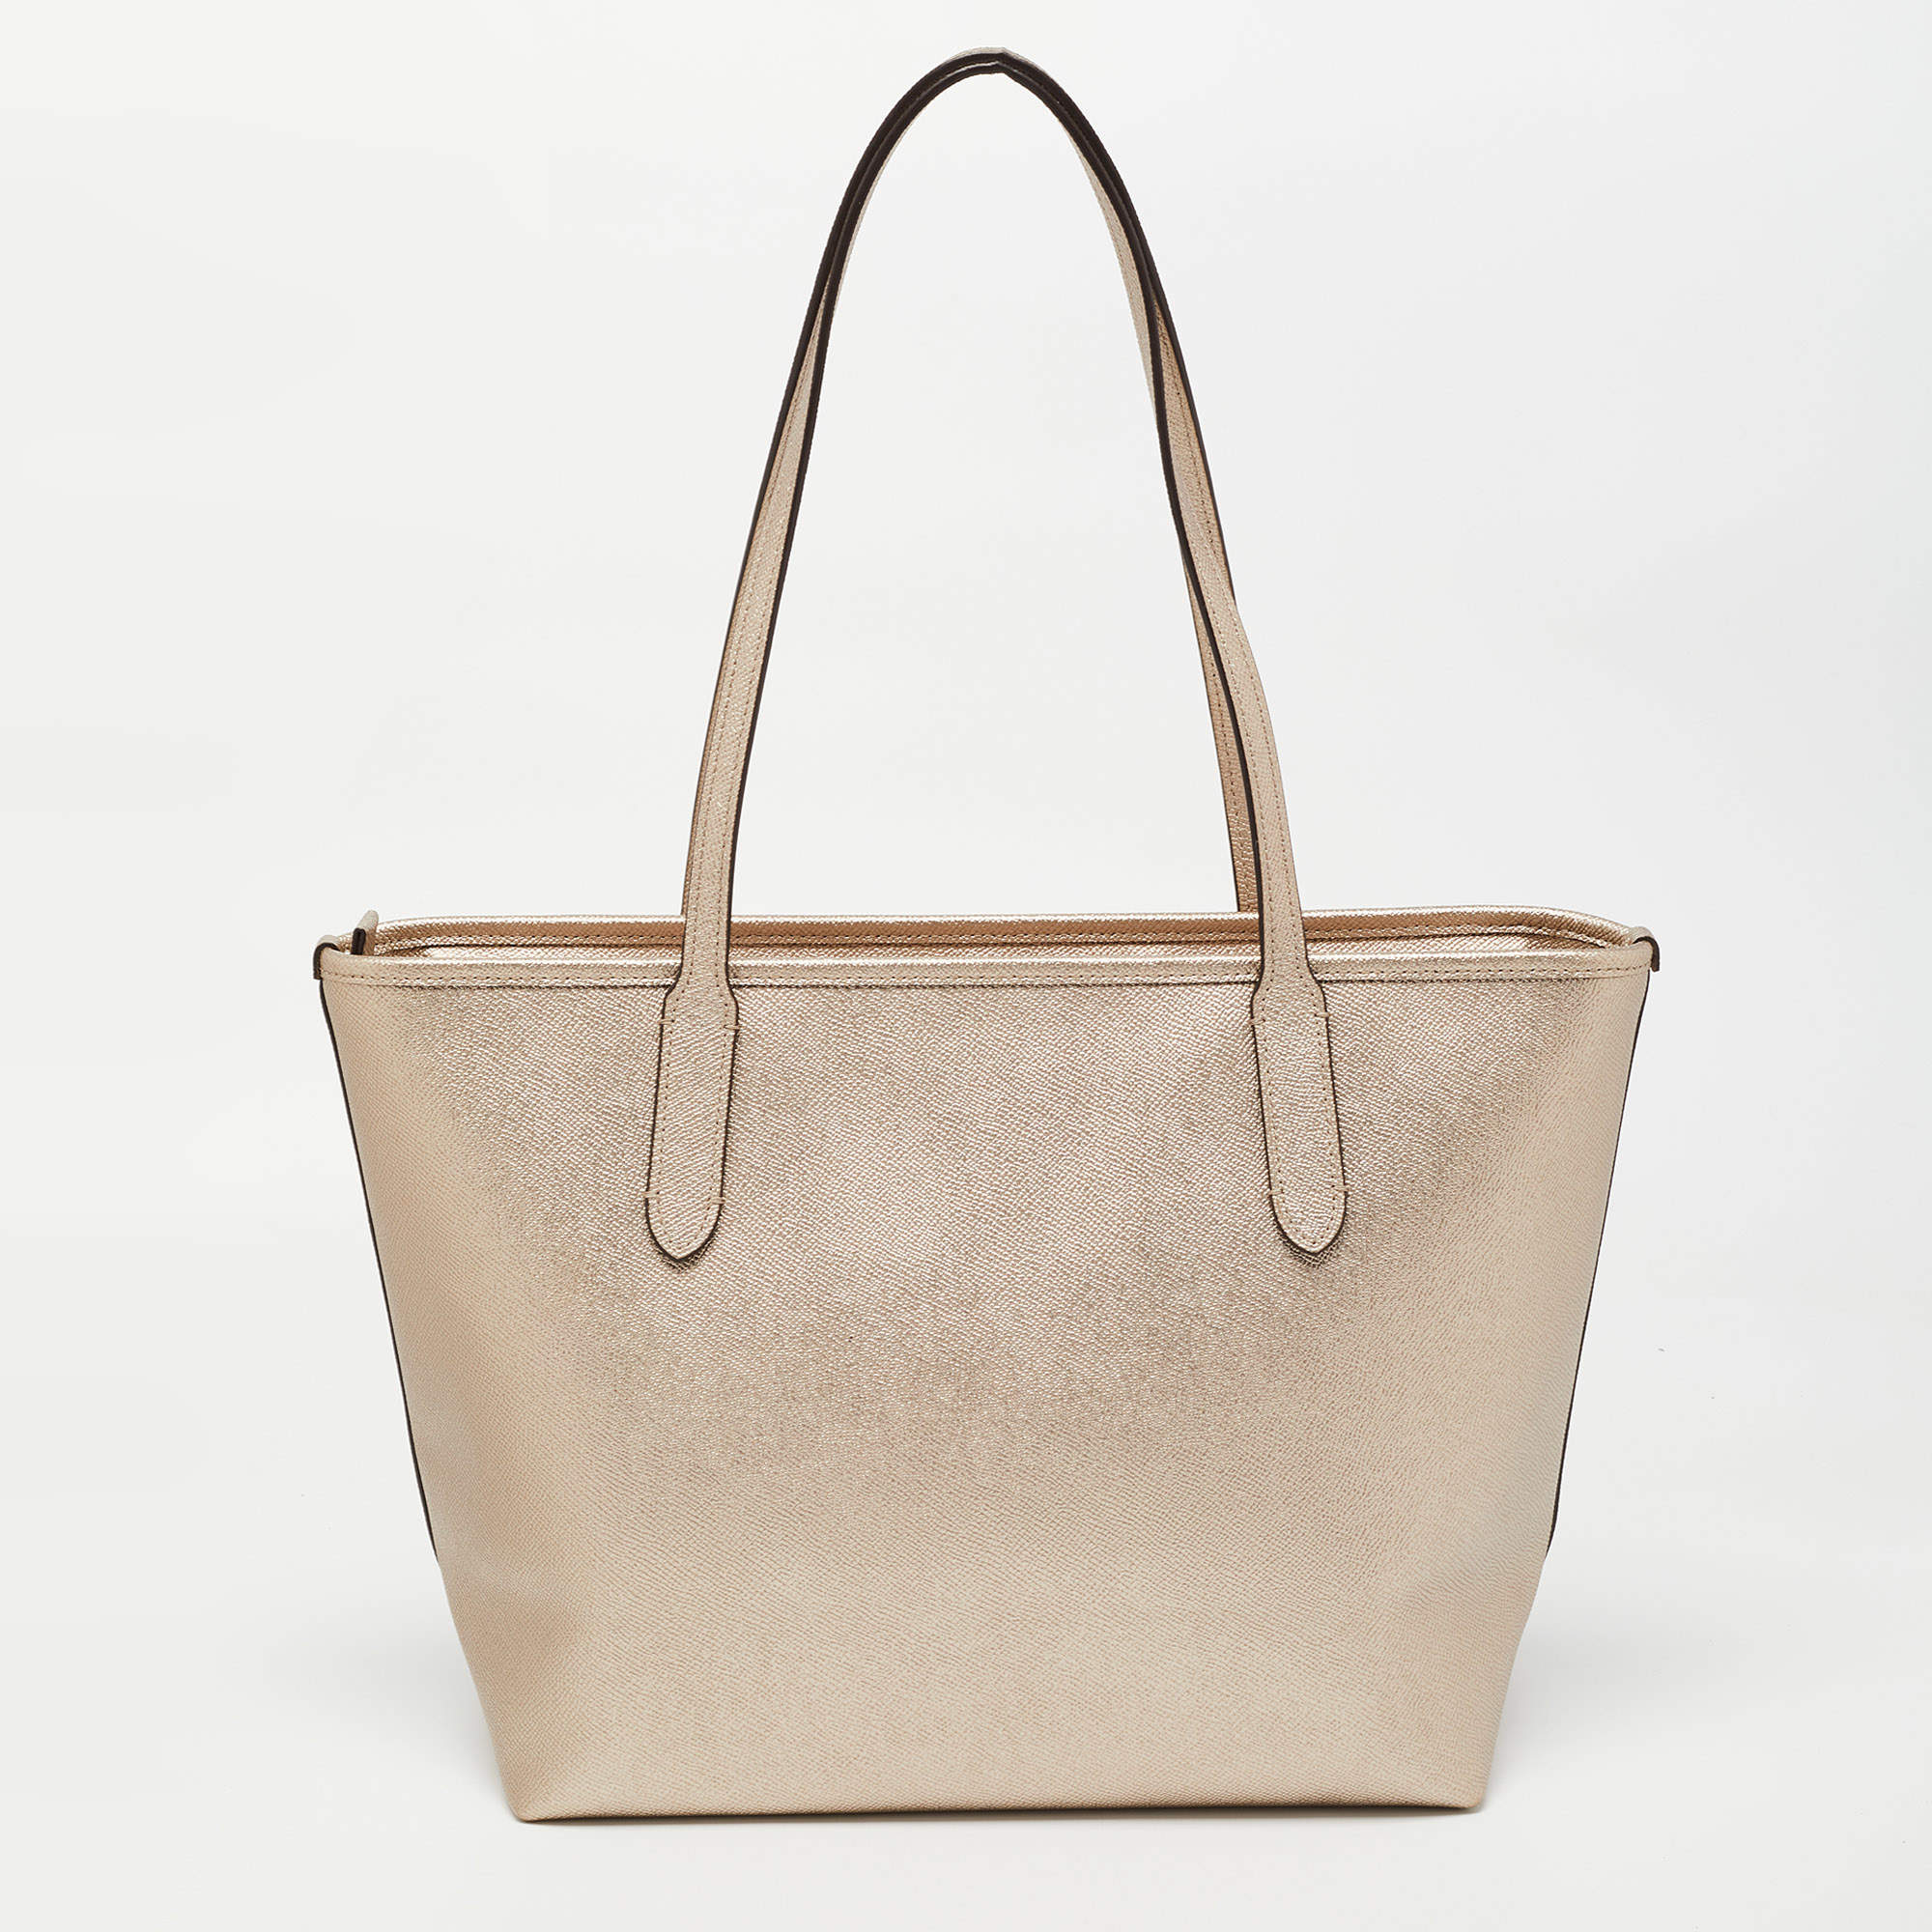 Coach Light Gold Leather City Tote